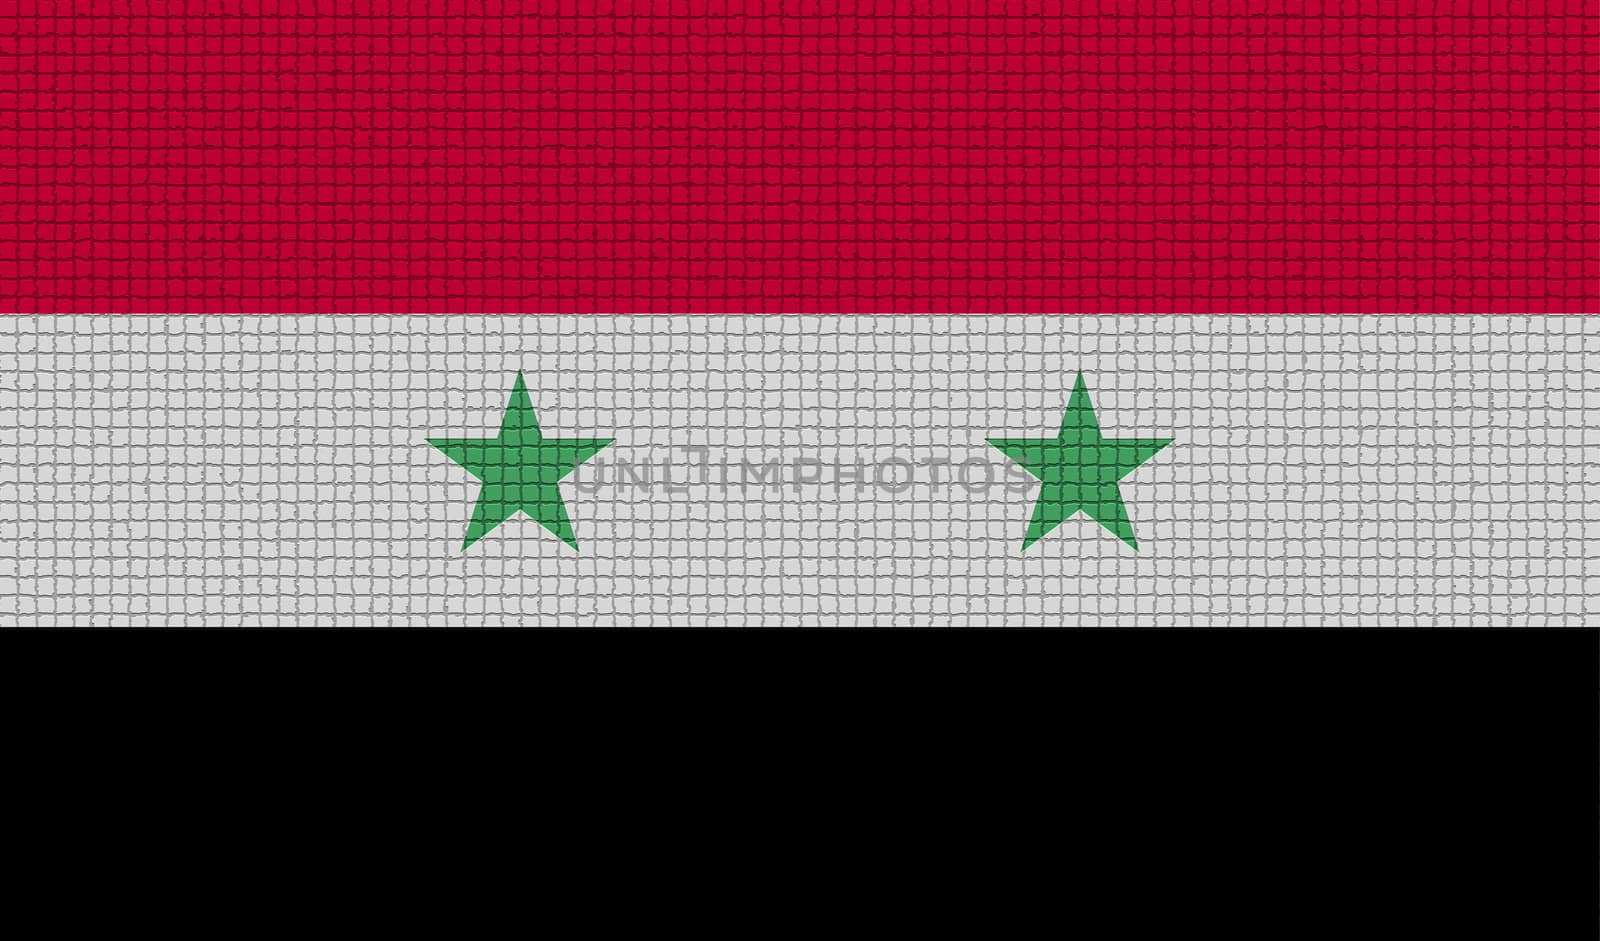 Flags of Syria with abstract textures. Rasterized version